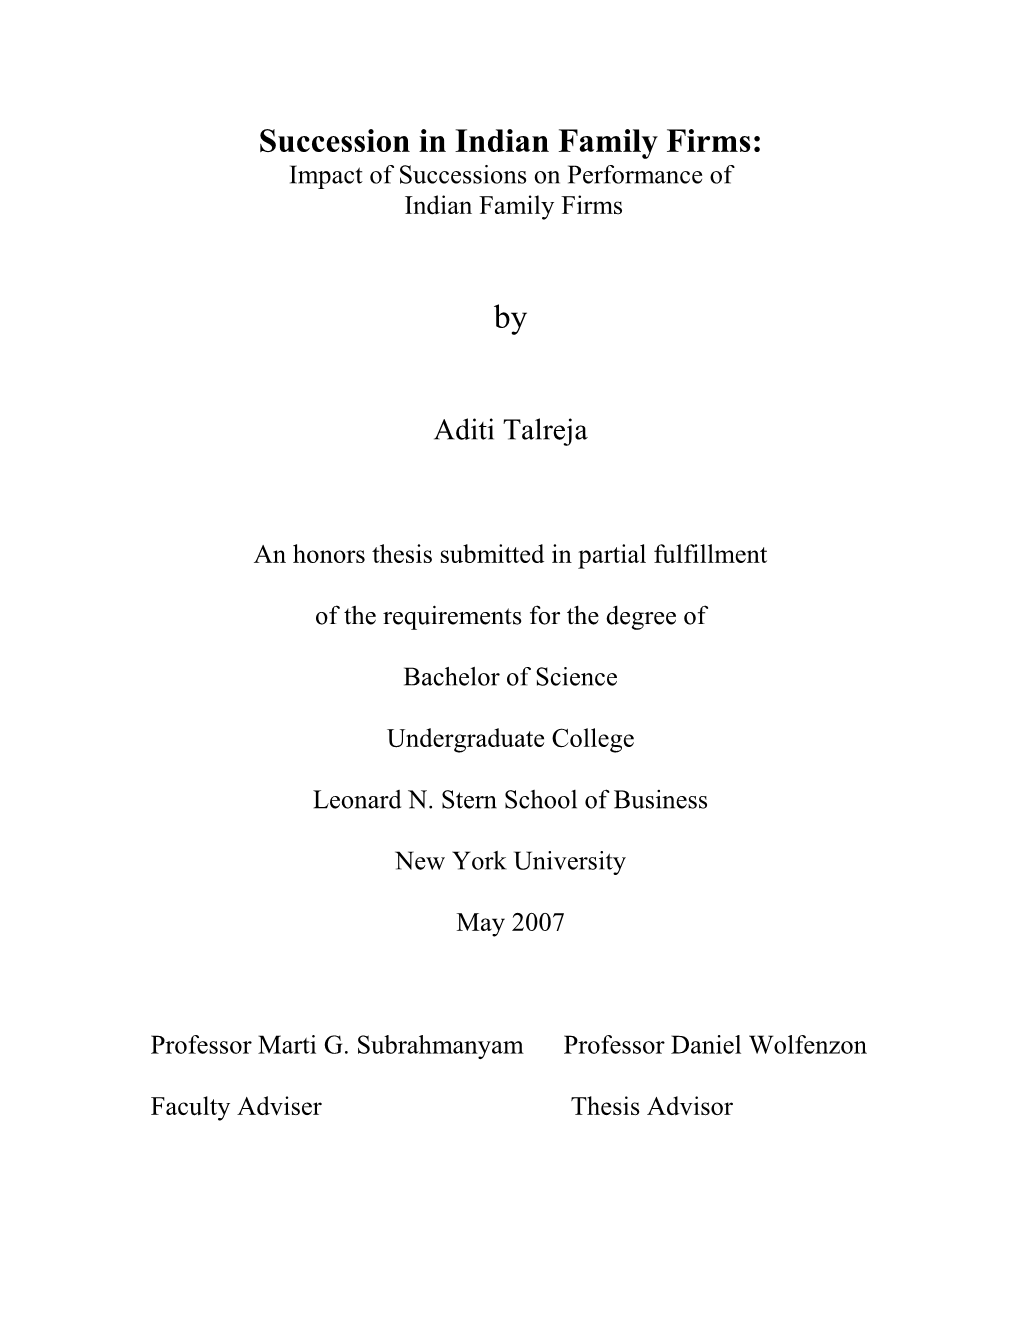 Succession in Indian Family Firms: Impact of Successions on Performance of Indian Family Firms